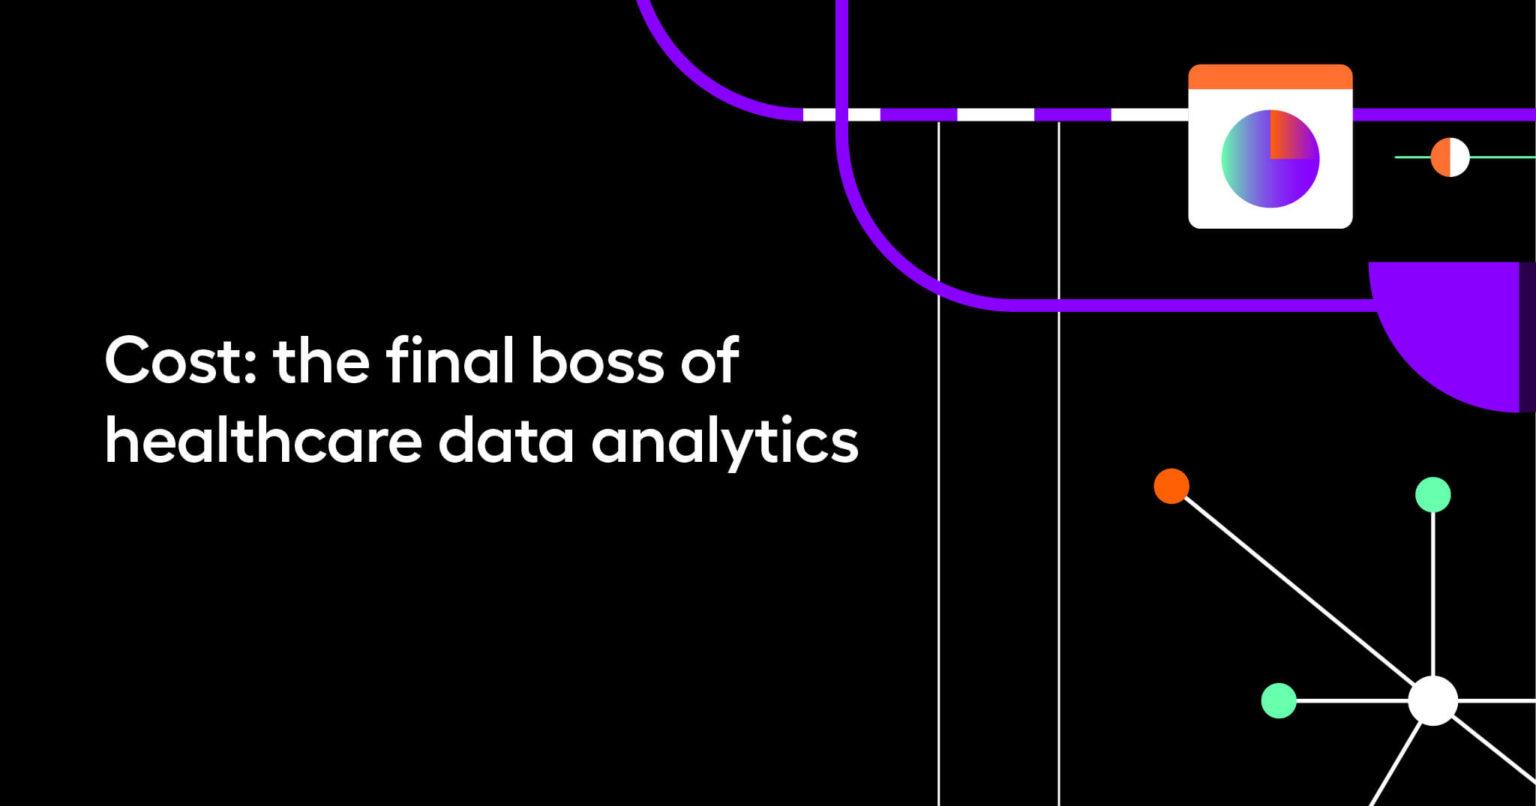 Cost: the final boss of healthcare data analytics